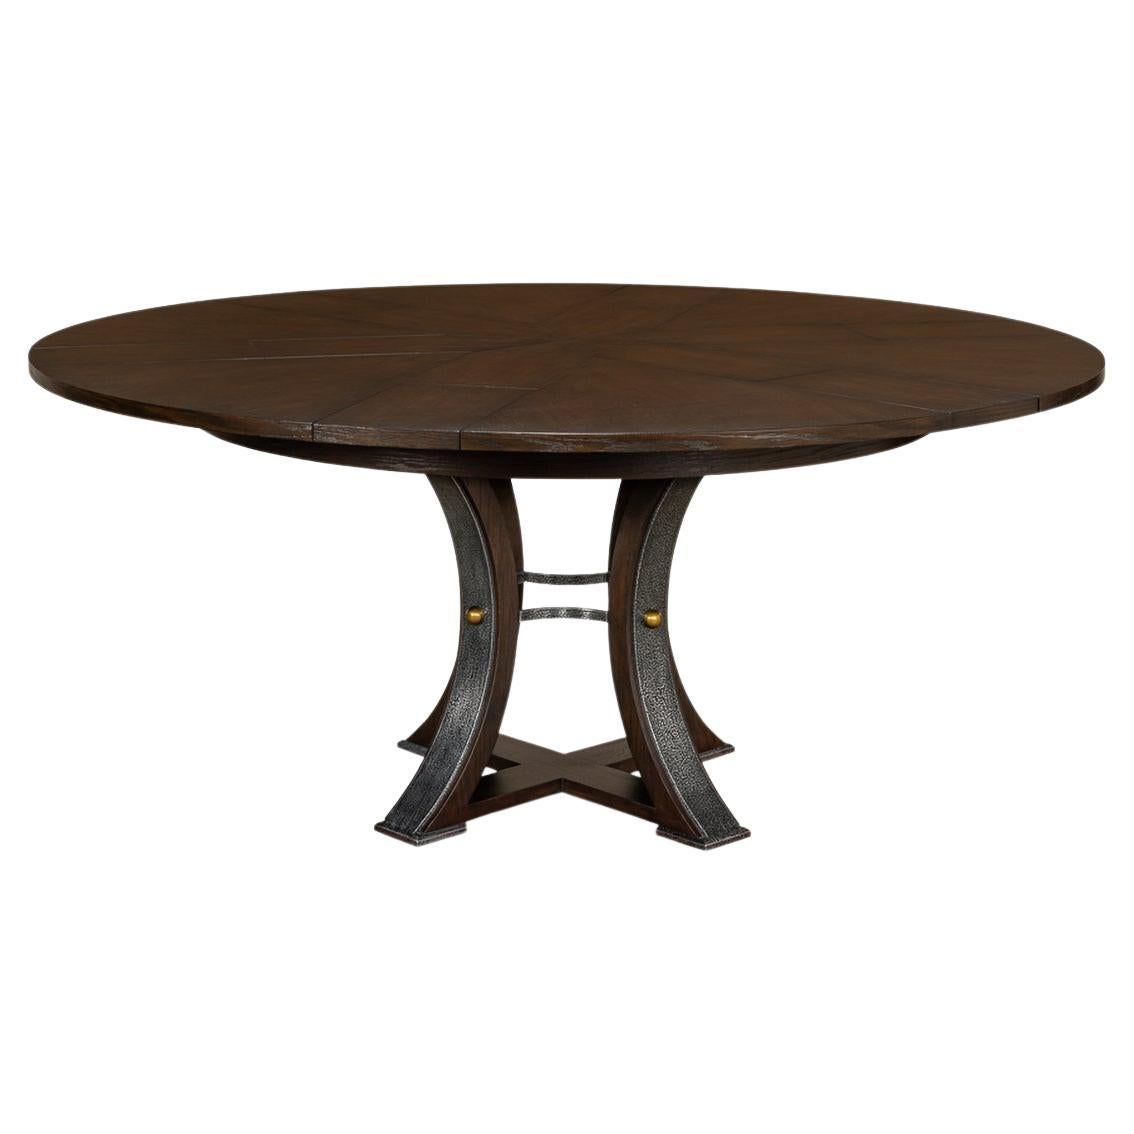 Modern Industrial Dining Table, 70, Burnt Brown For Sale